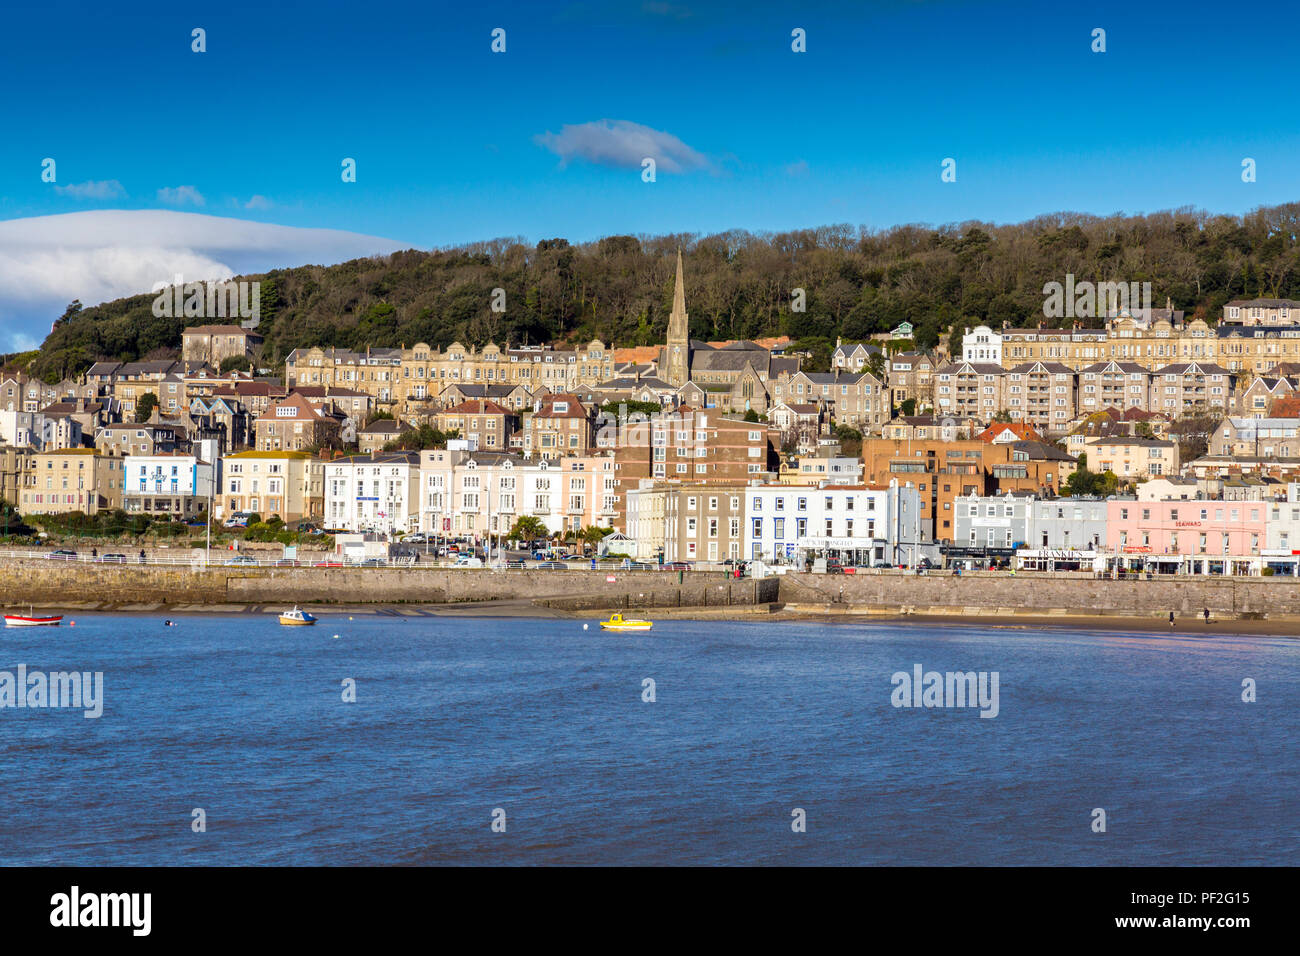 Elegant hotel and residential properties on the seafront at Weston-super-Mare, North Somerset, England, UK Stock Photo